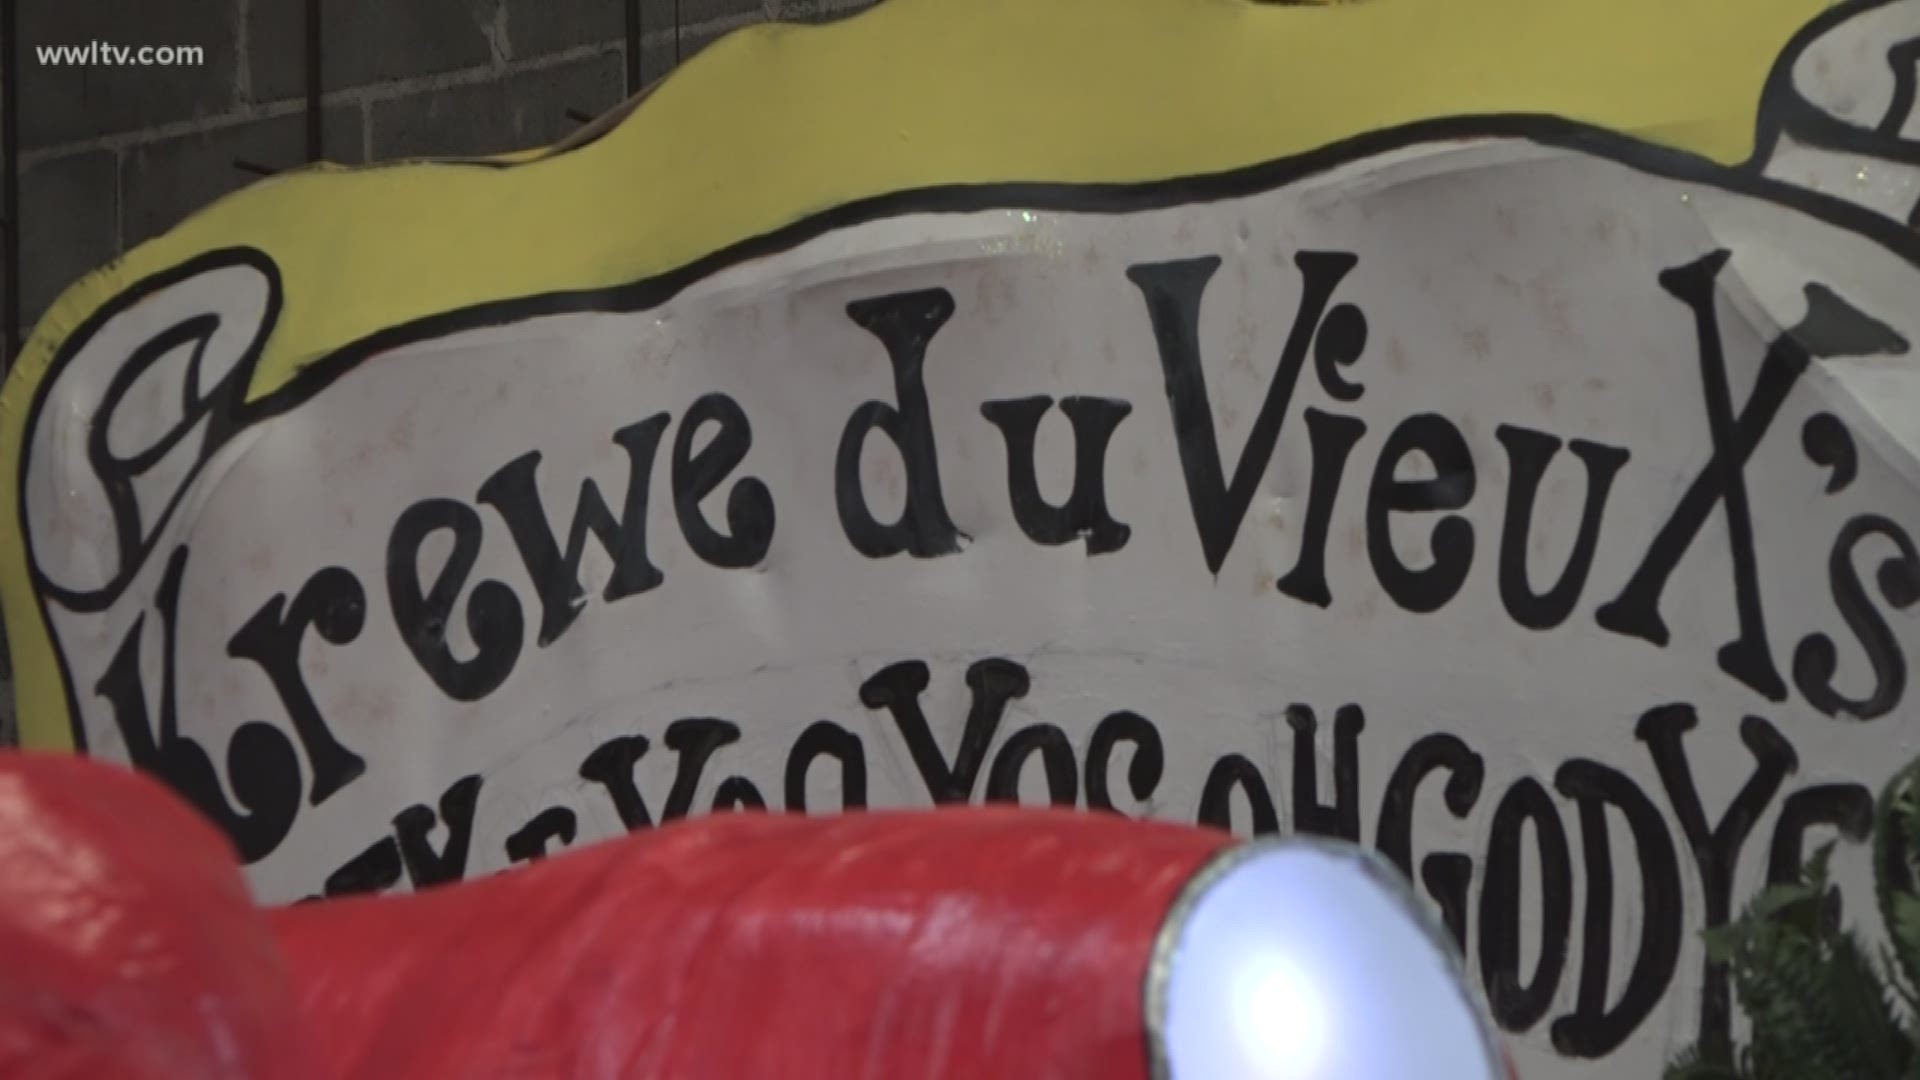 This year's Krewe du Vieux theme is "The City of Yes, Yes, Oh God Yes."